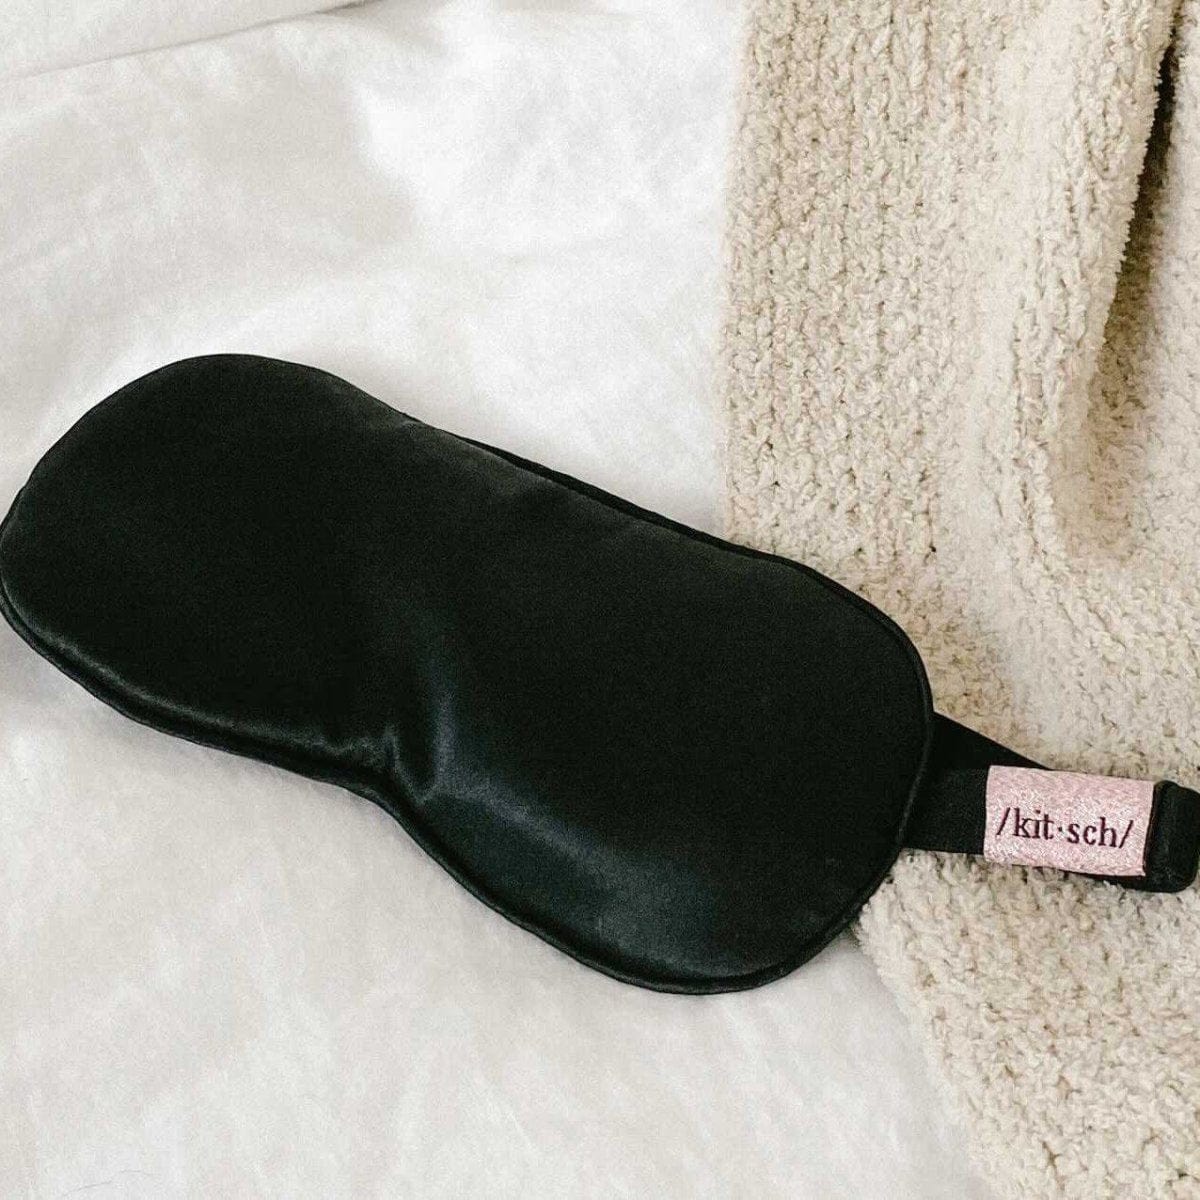 The Lavender Weighted Satin Eye Mask